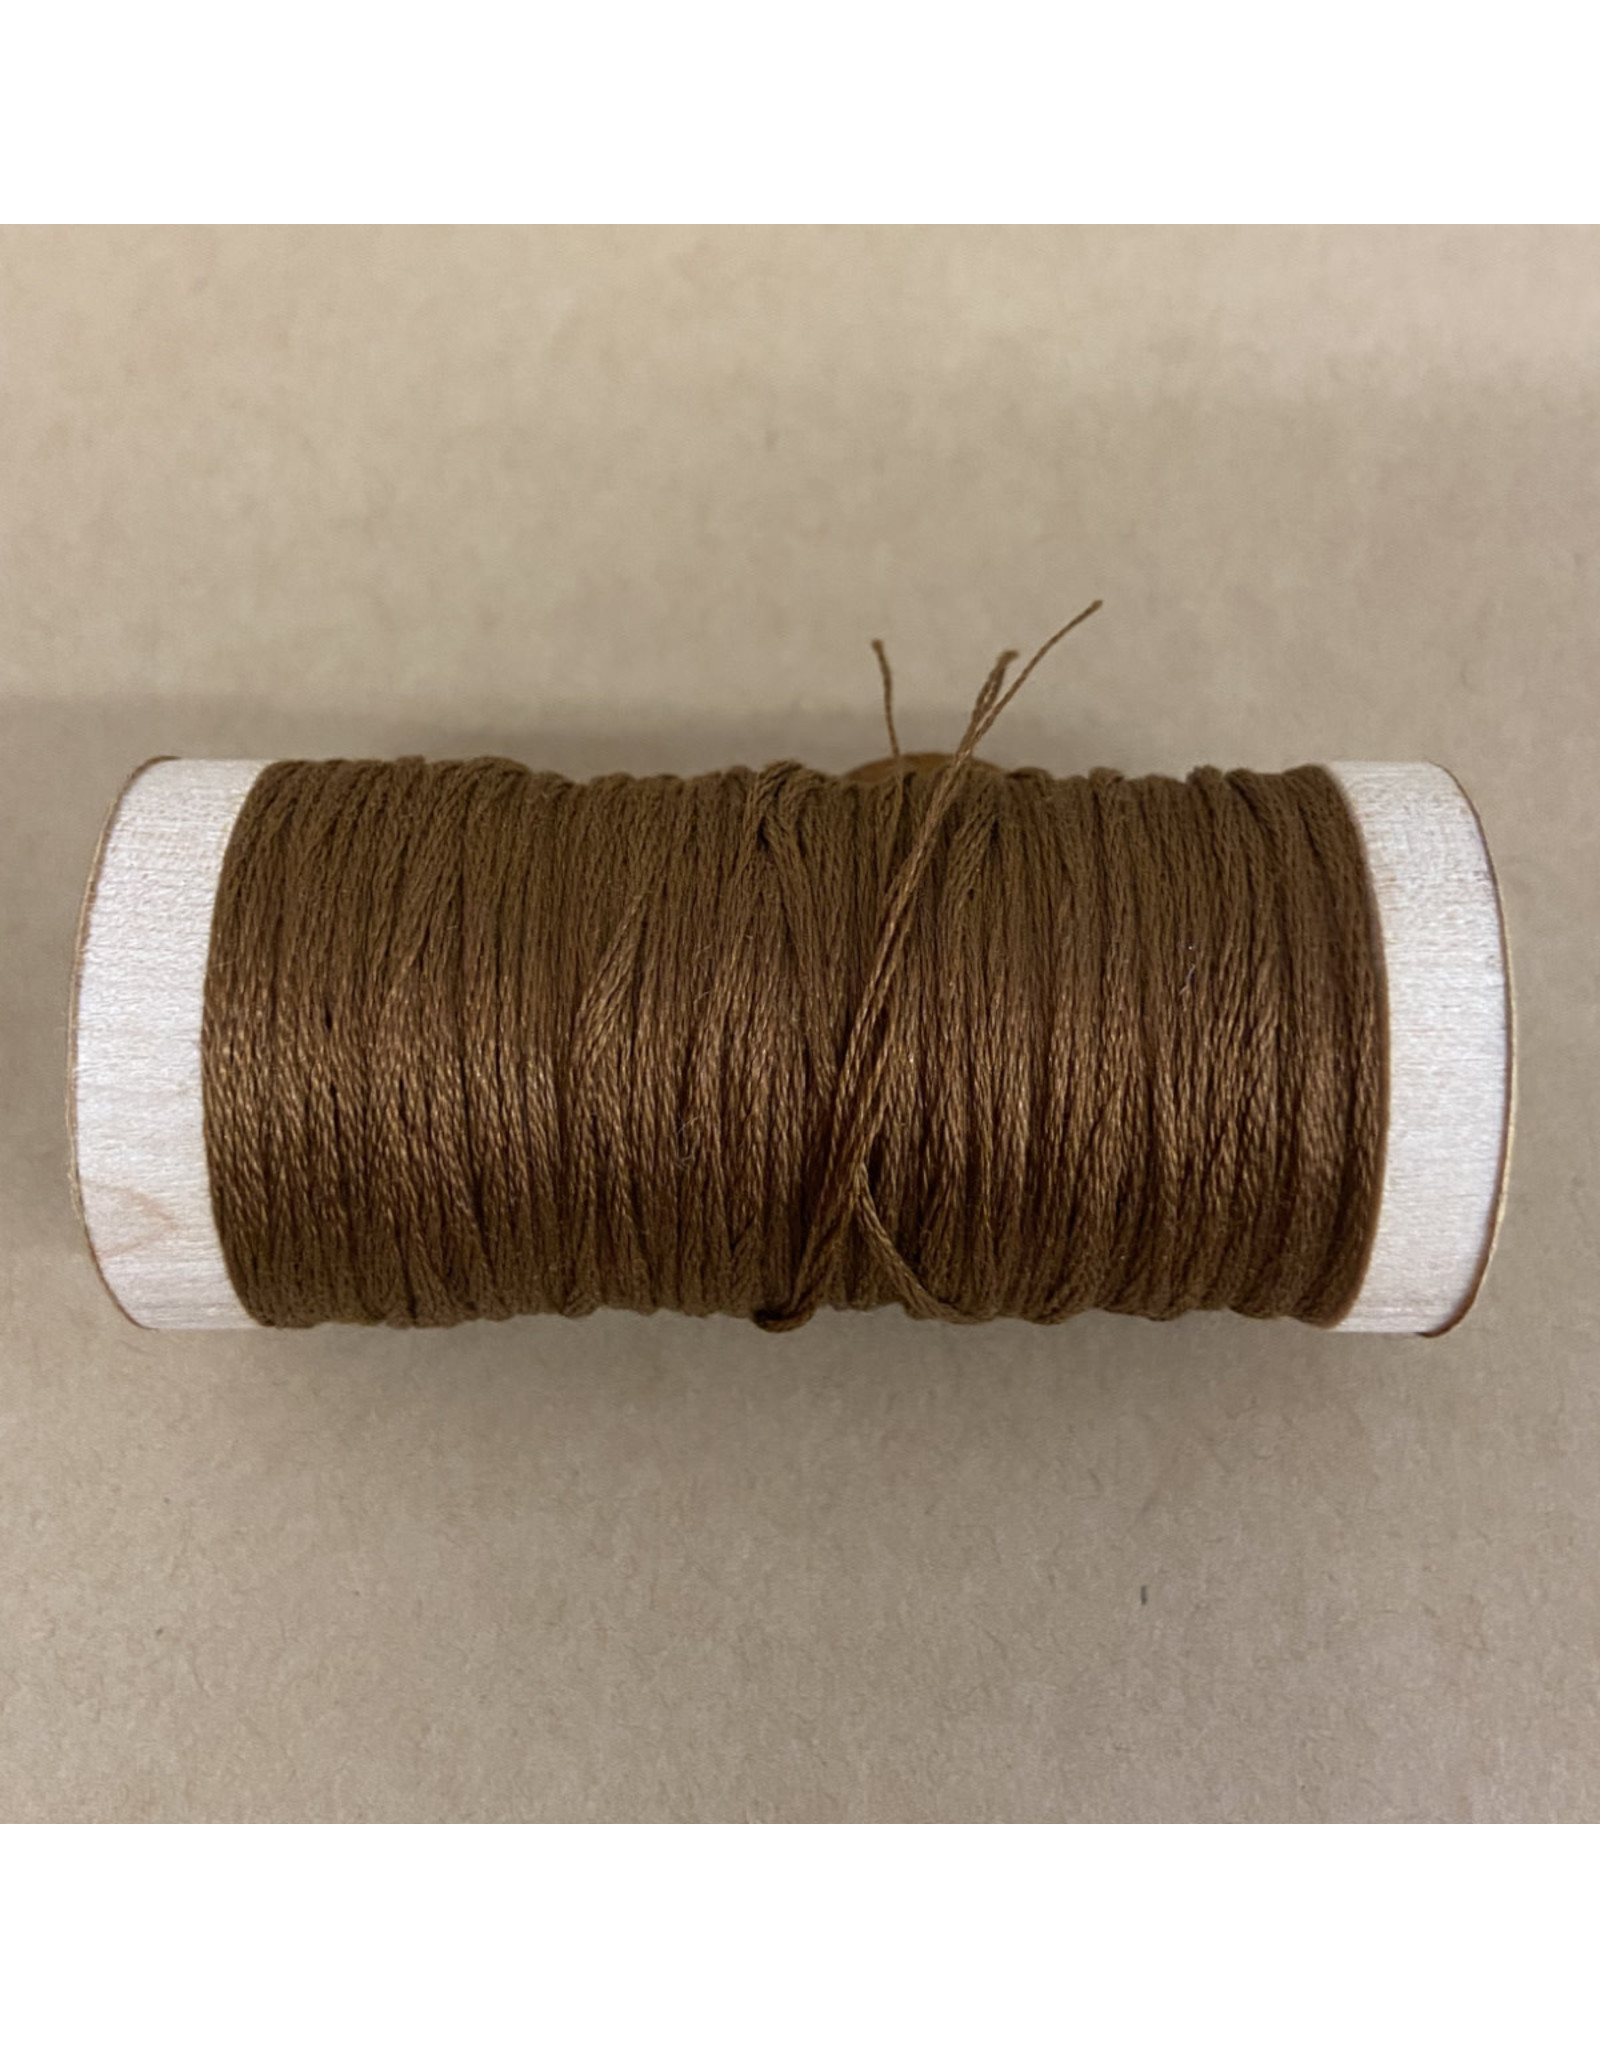 PD Embroidery Floss, Extra Large Spool, Camel